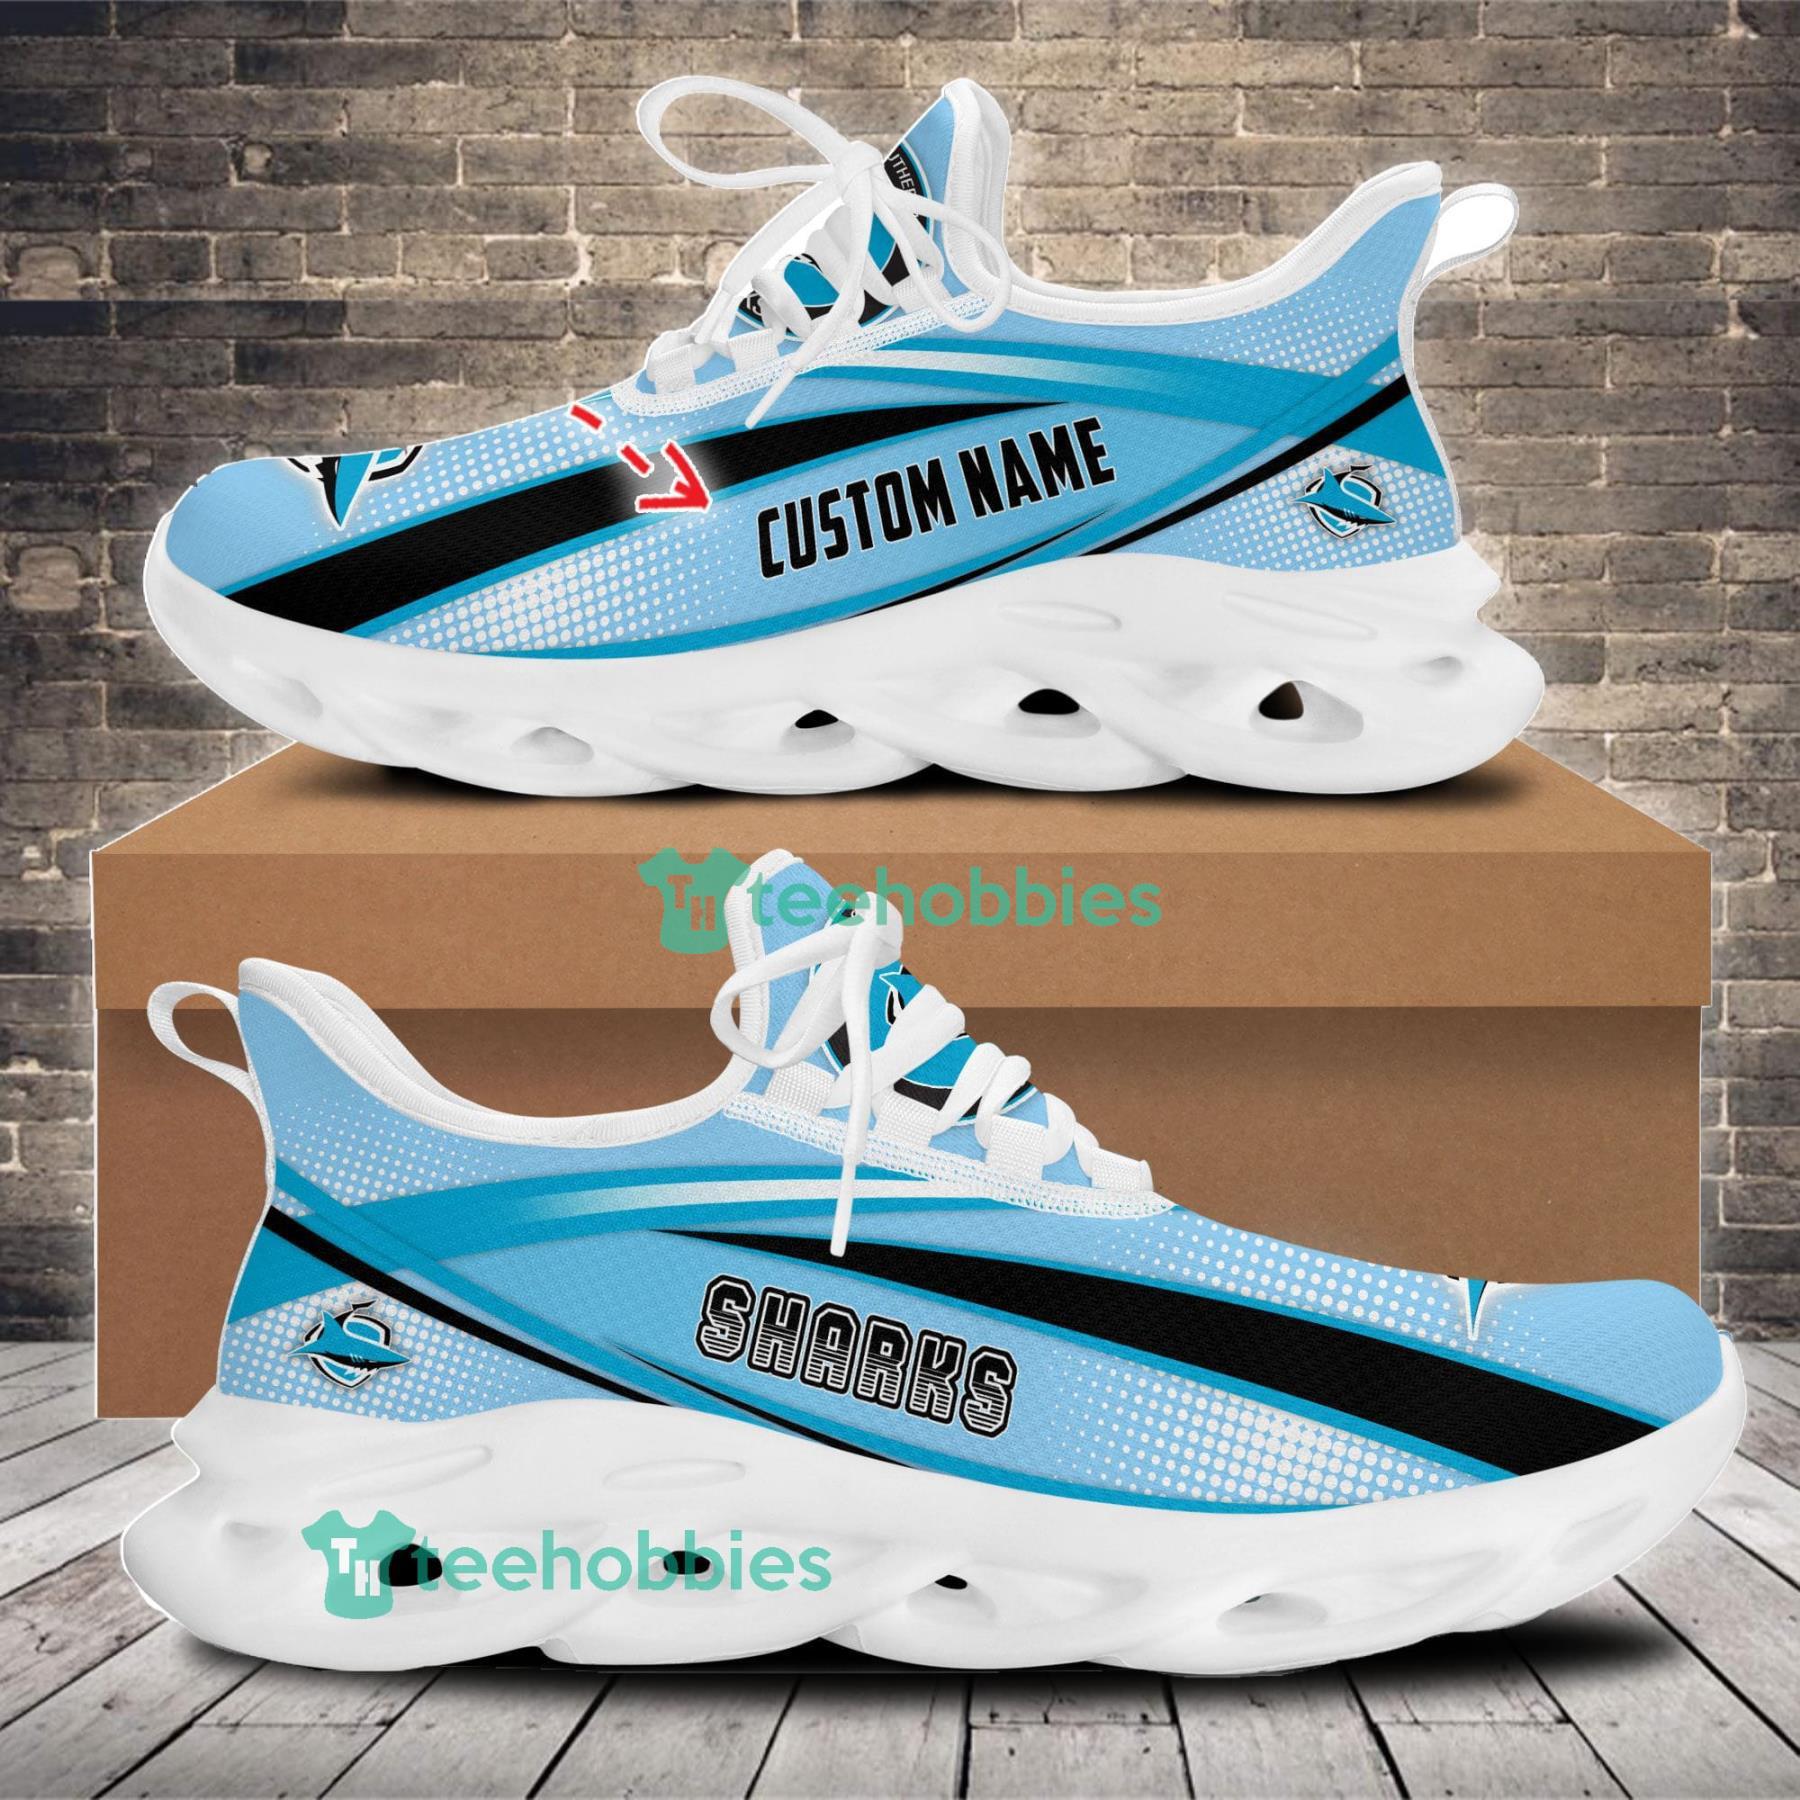 Cronulla-Sutherland Sharks Custom Name Sneakers Max Soul Shoes For Men And Women Product Photo 1